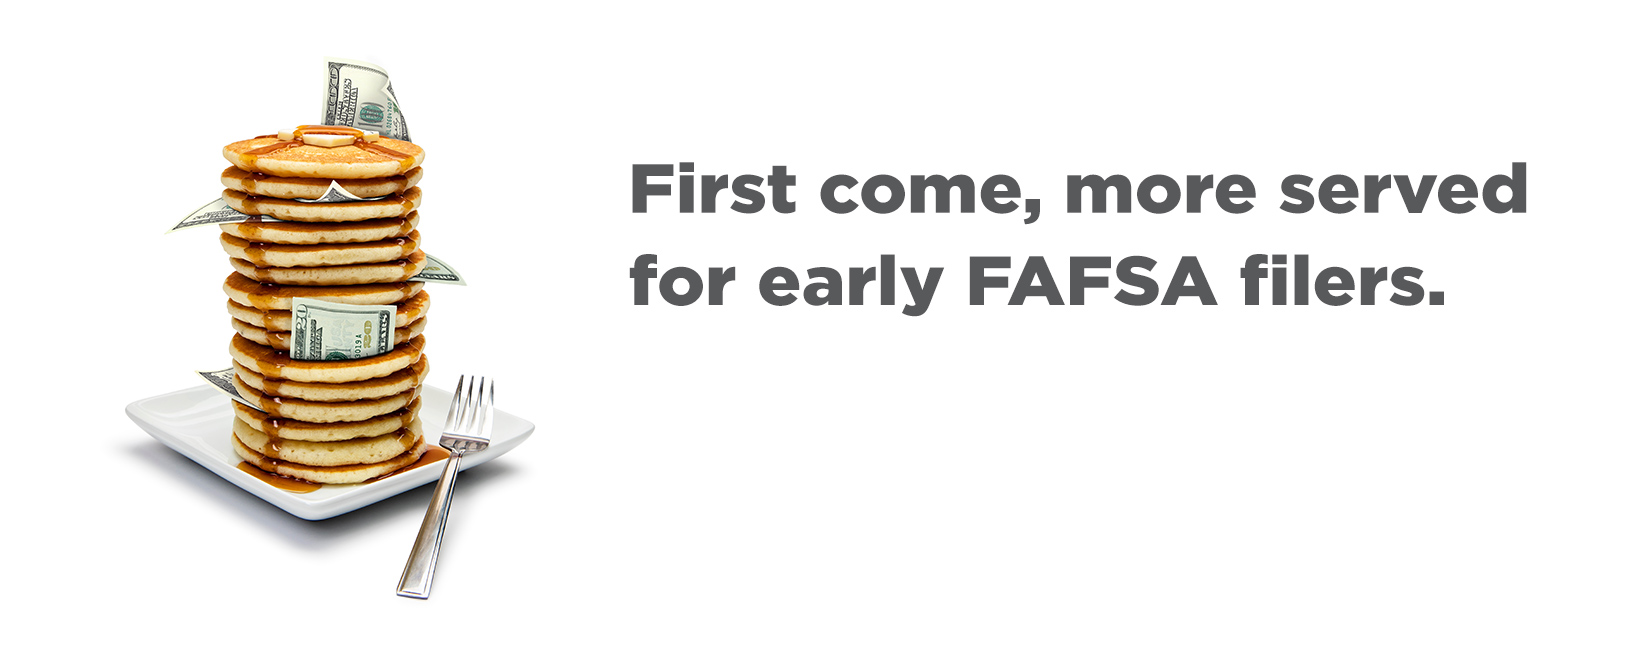 FAFSA Frenzy: Early filers can get more financial aid.